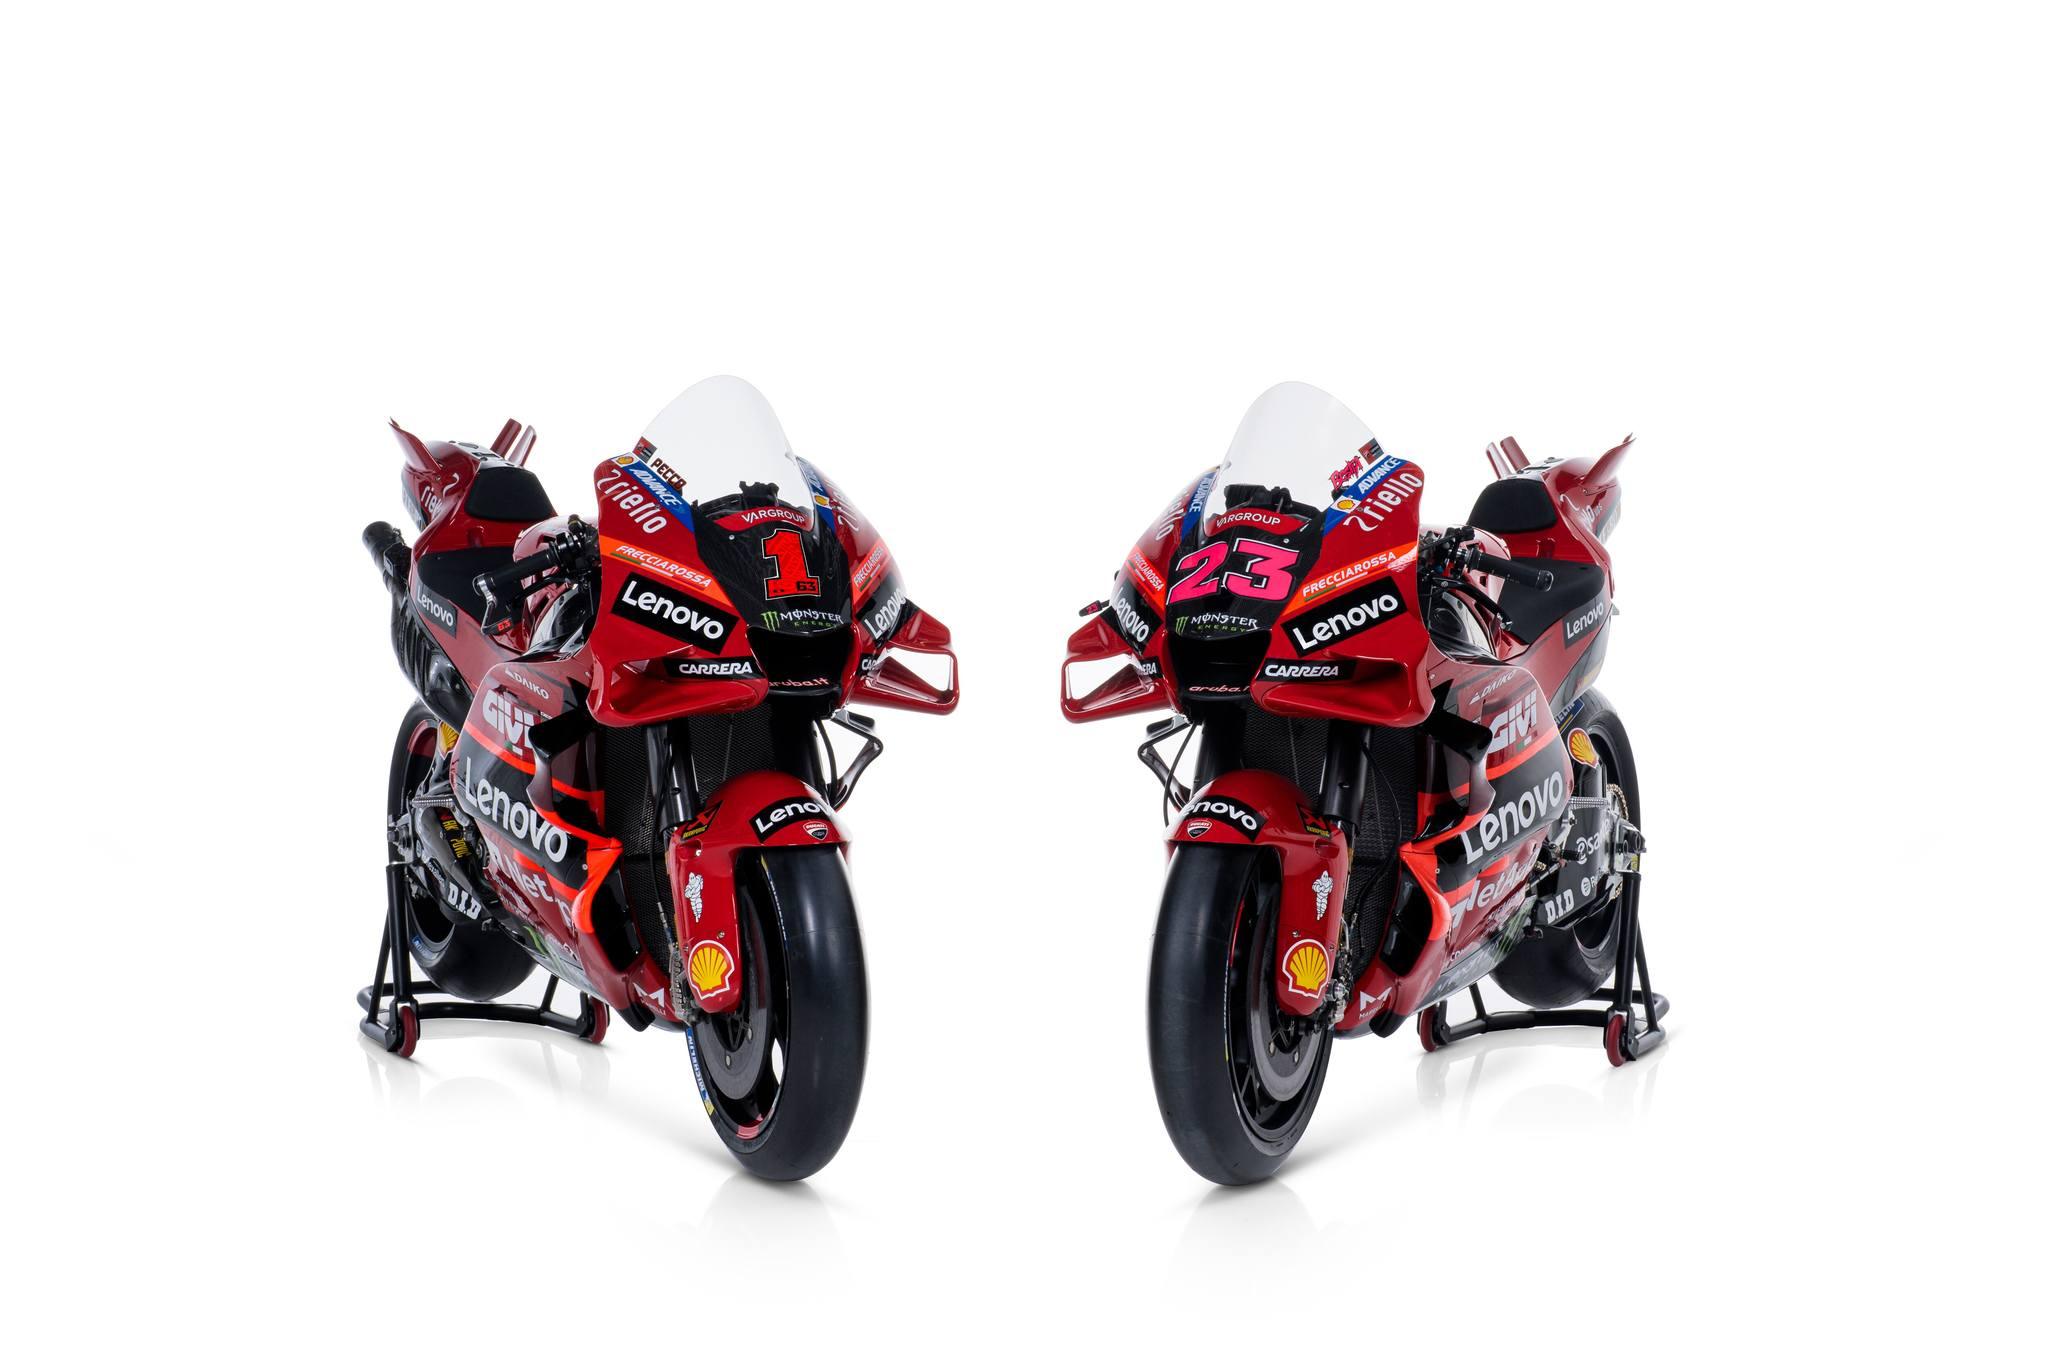 Ducati has revealed their new 2023 livery!